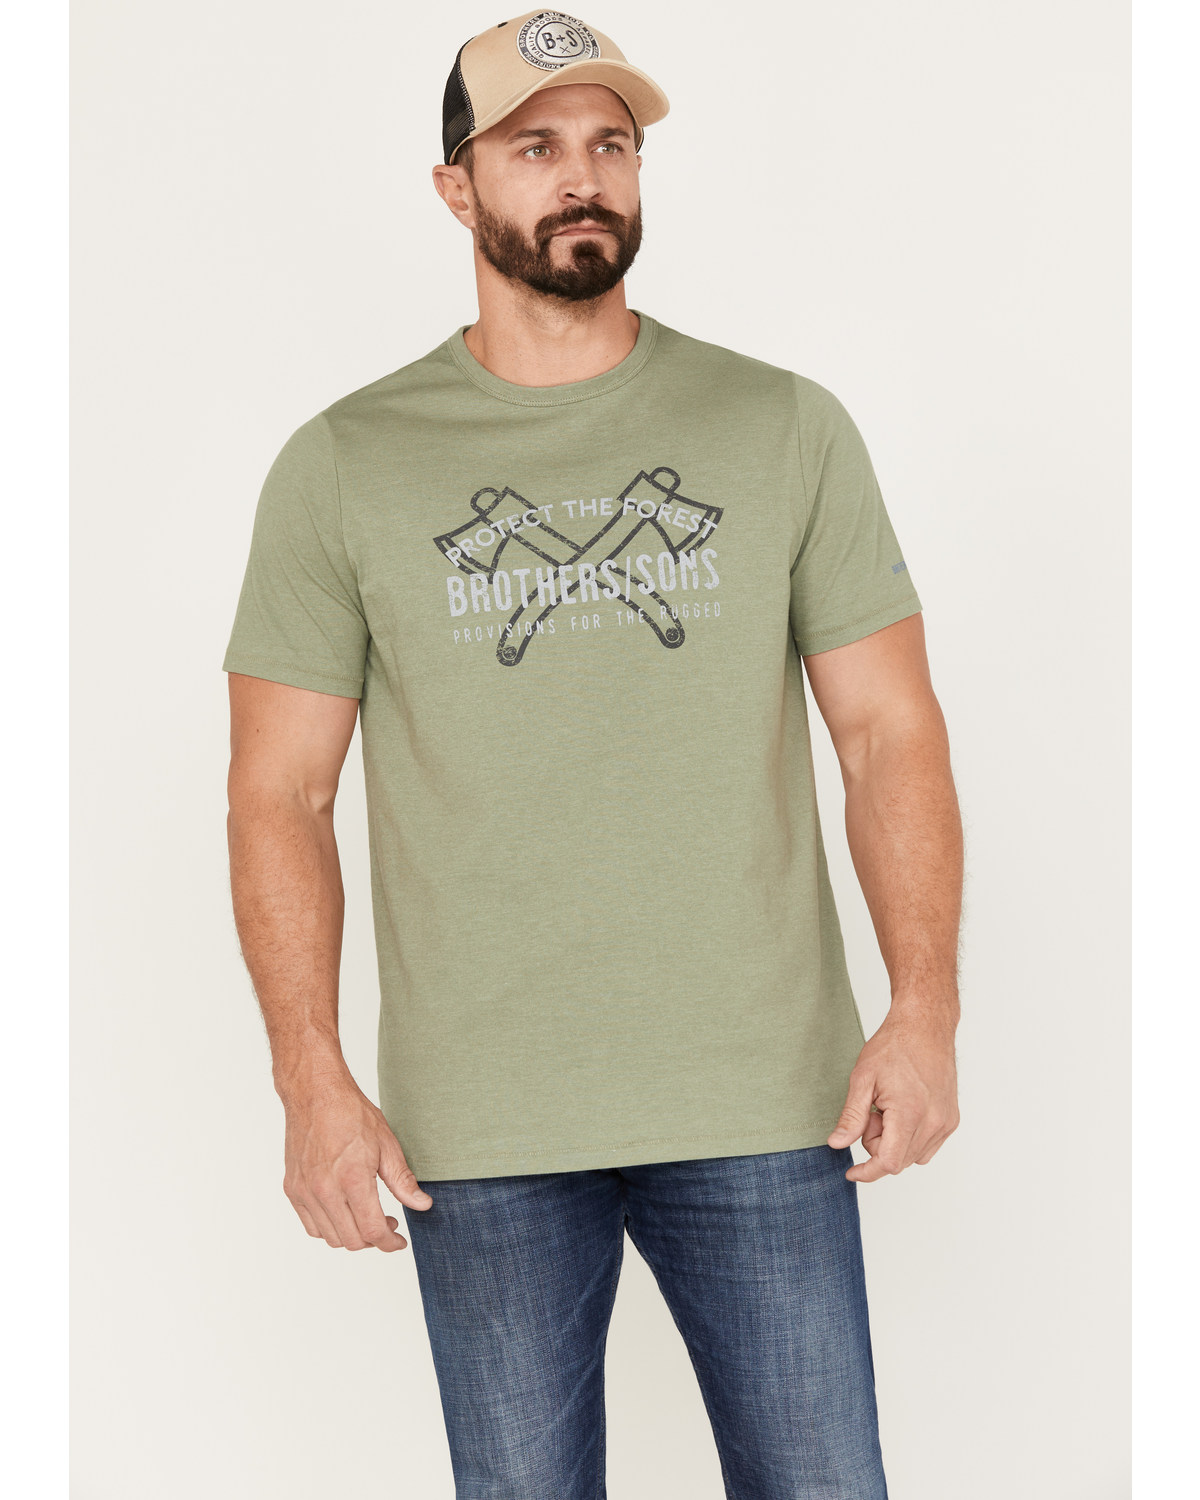 Brothers and Sons Men's Protect The Forest Short Sleeve Graphic T-Shirt